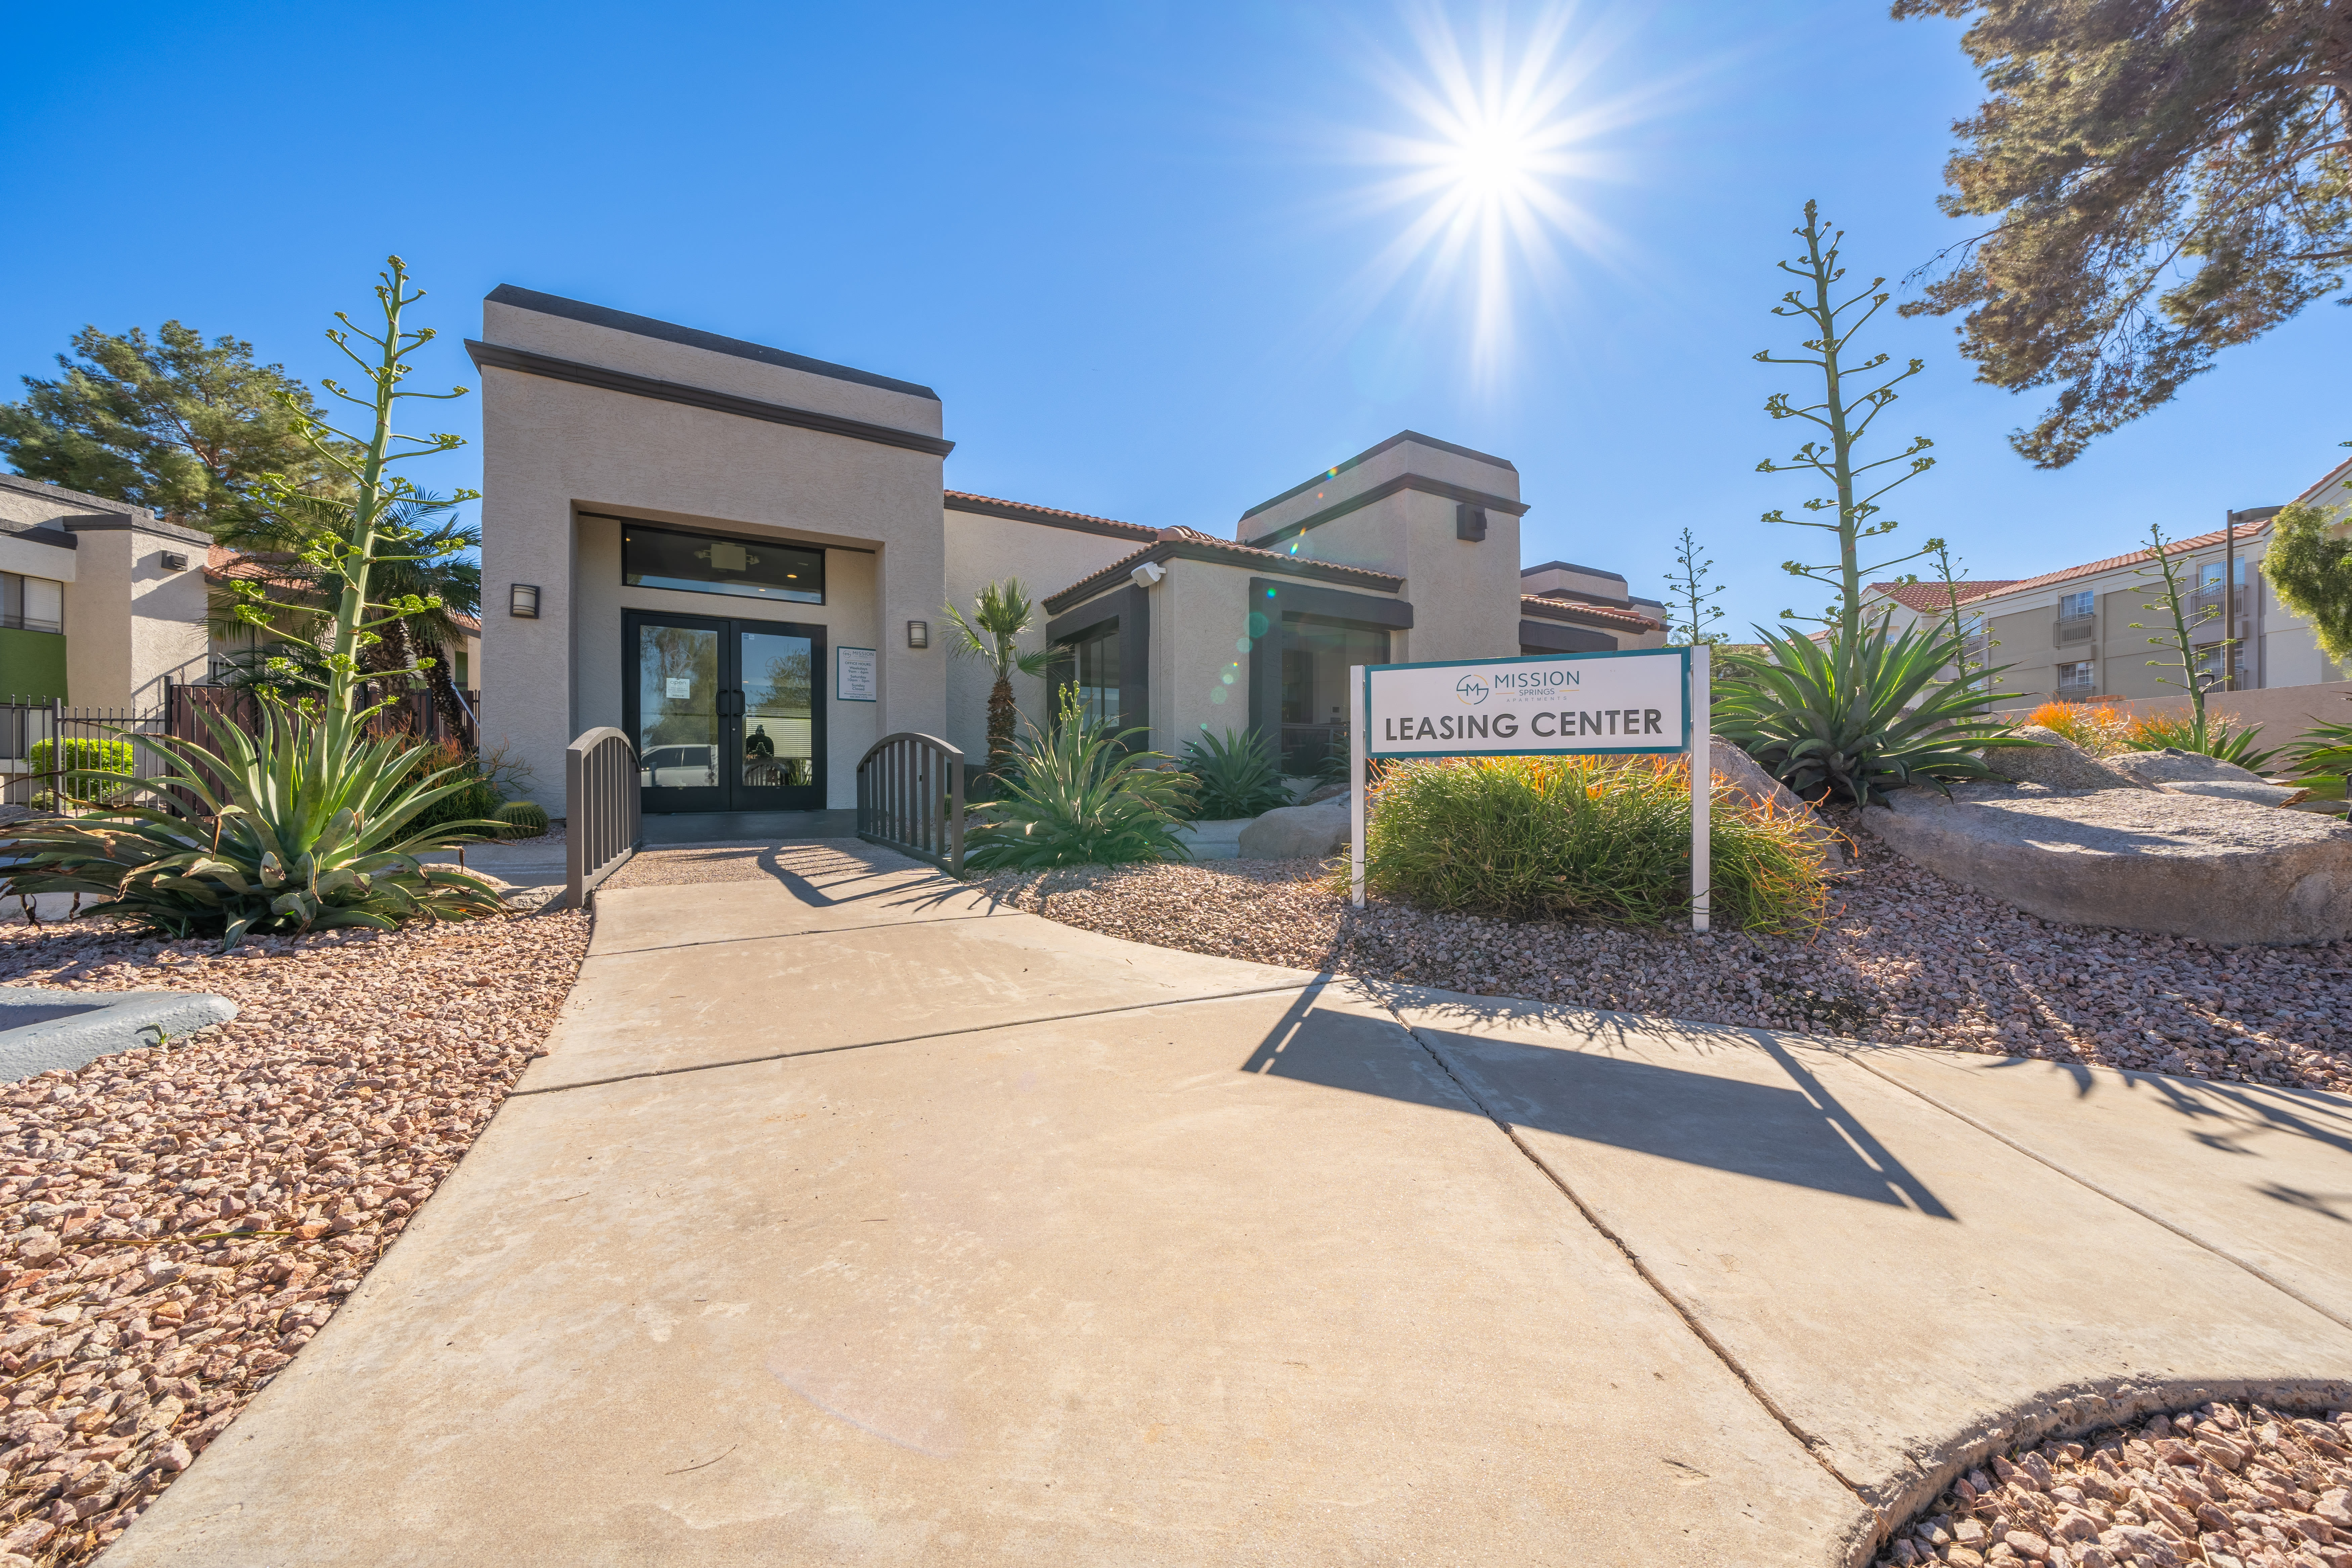 leasing center at Mission Springs in Tempe, Arizona